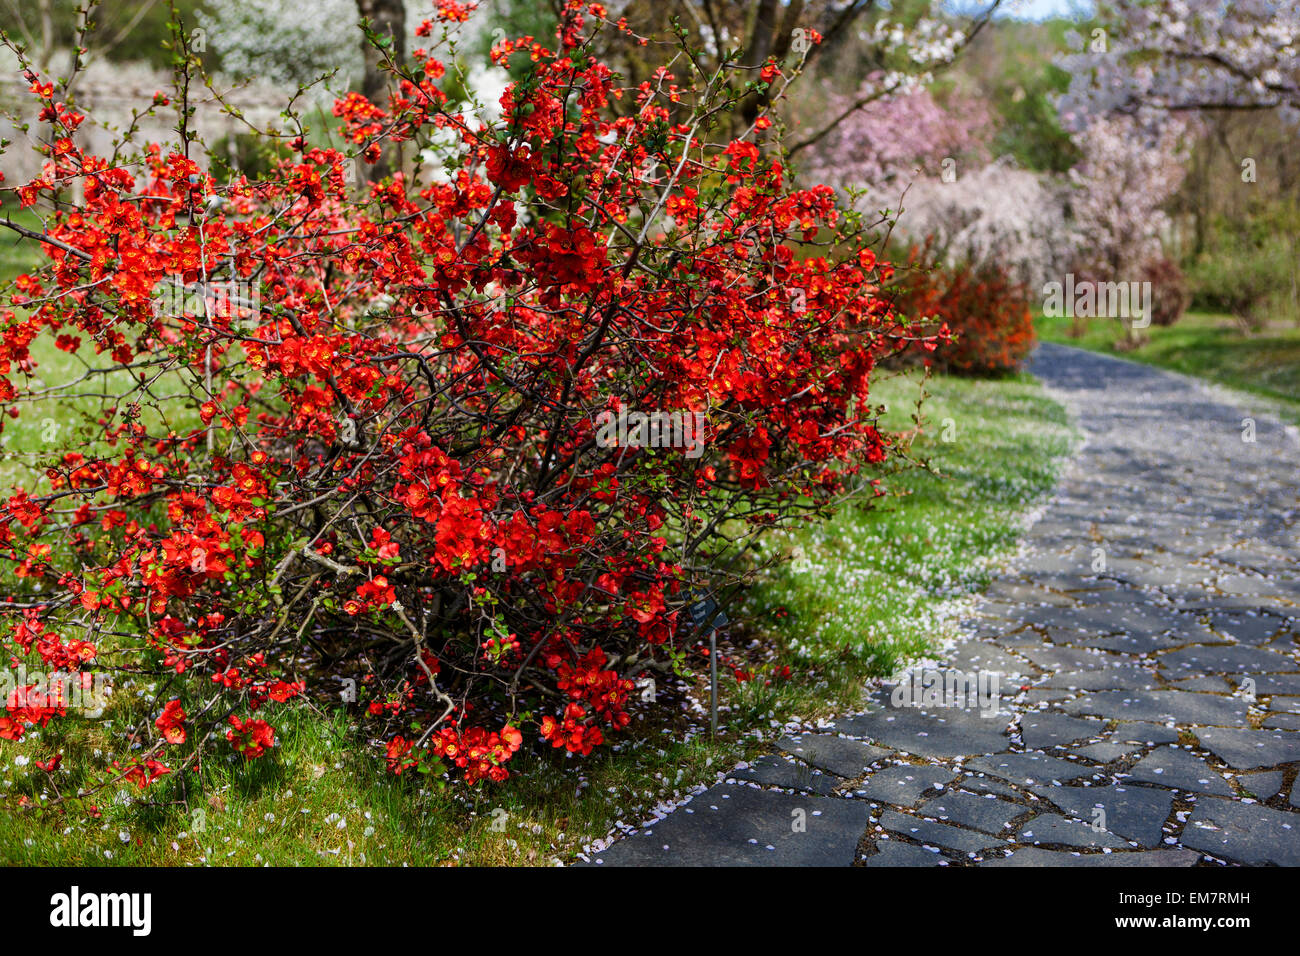 Blooming japanese quince Chaenomeles japonica at a garden path under Cherry tree flowering falling blossoms garden scene in Spring Scenery Red Shrubs Stock Photo